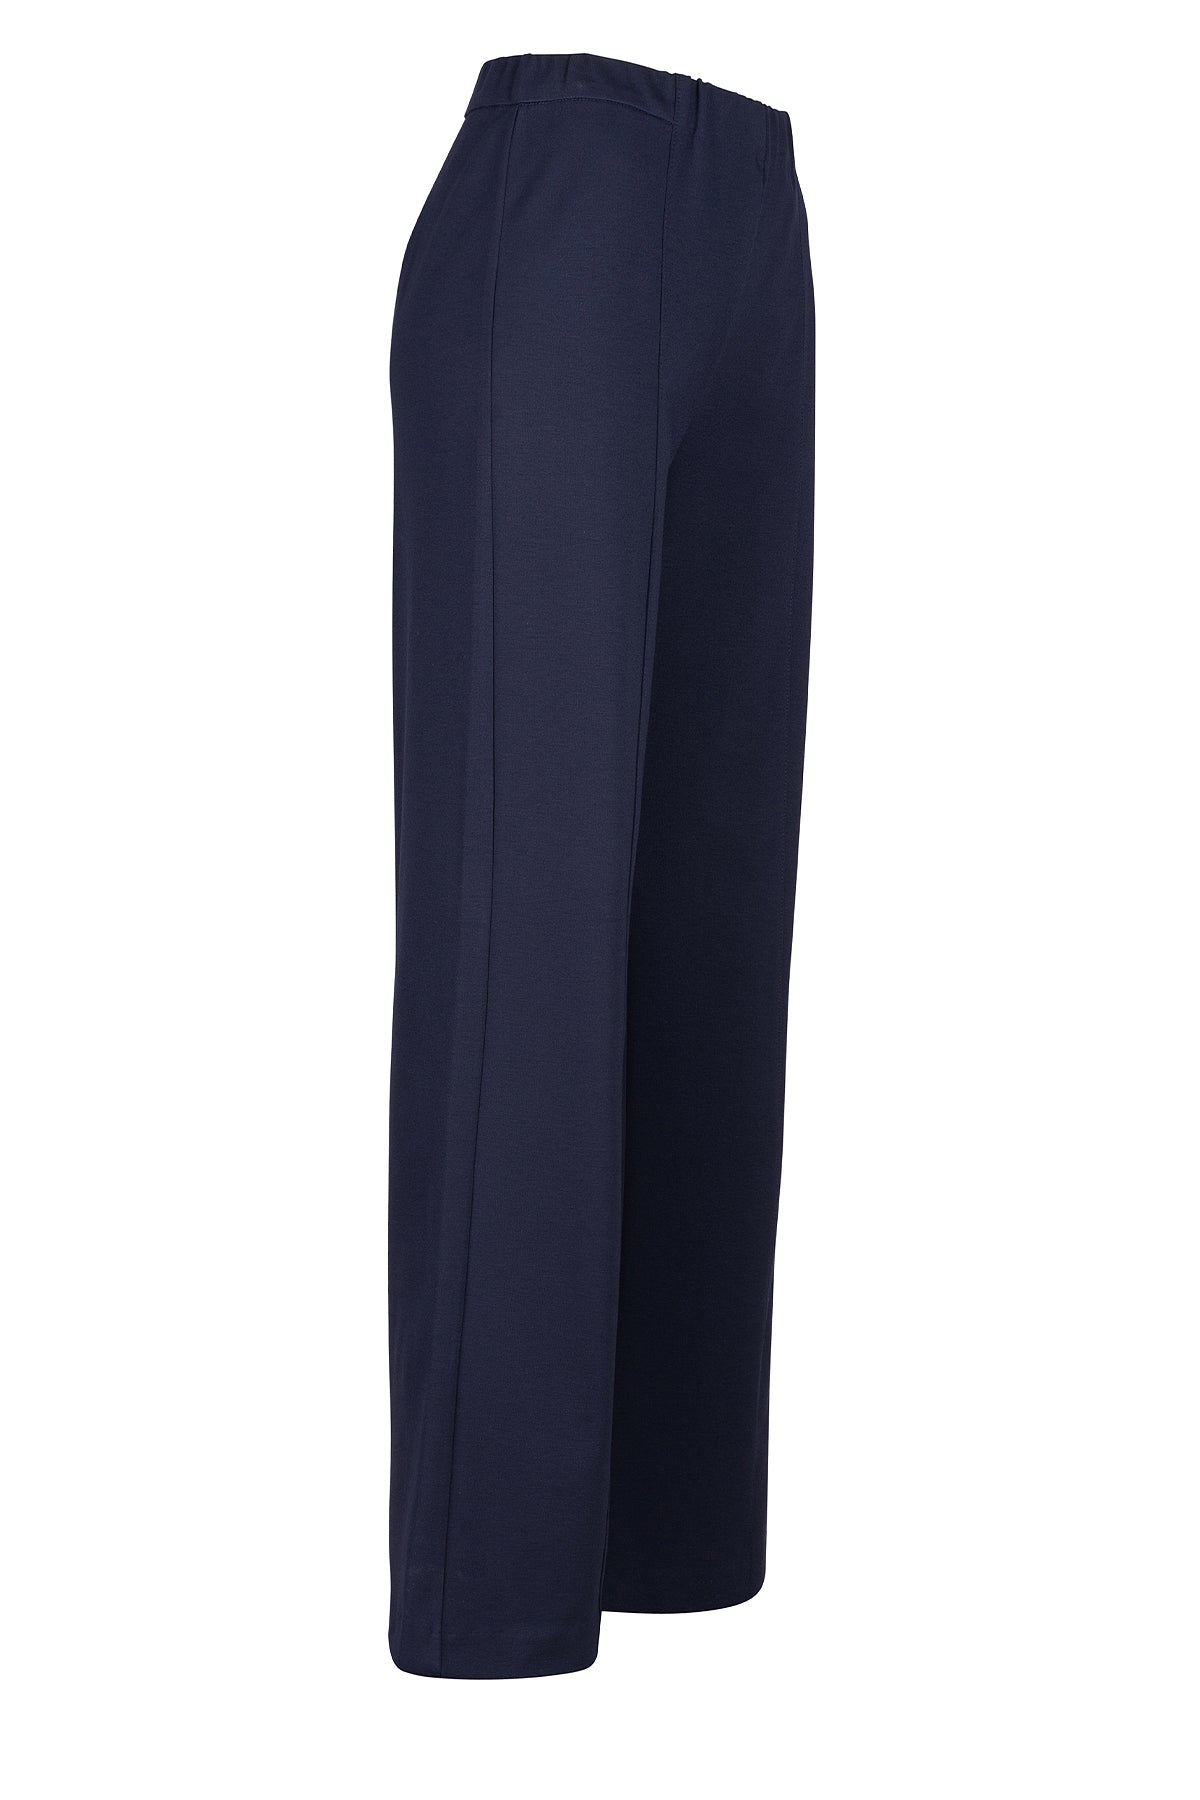 LUXZUZ // ONE TWO Beate Pant Pant 575 Navy